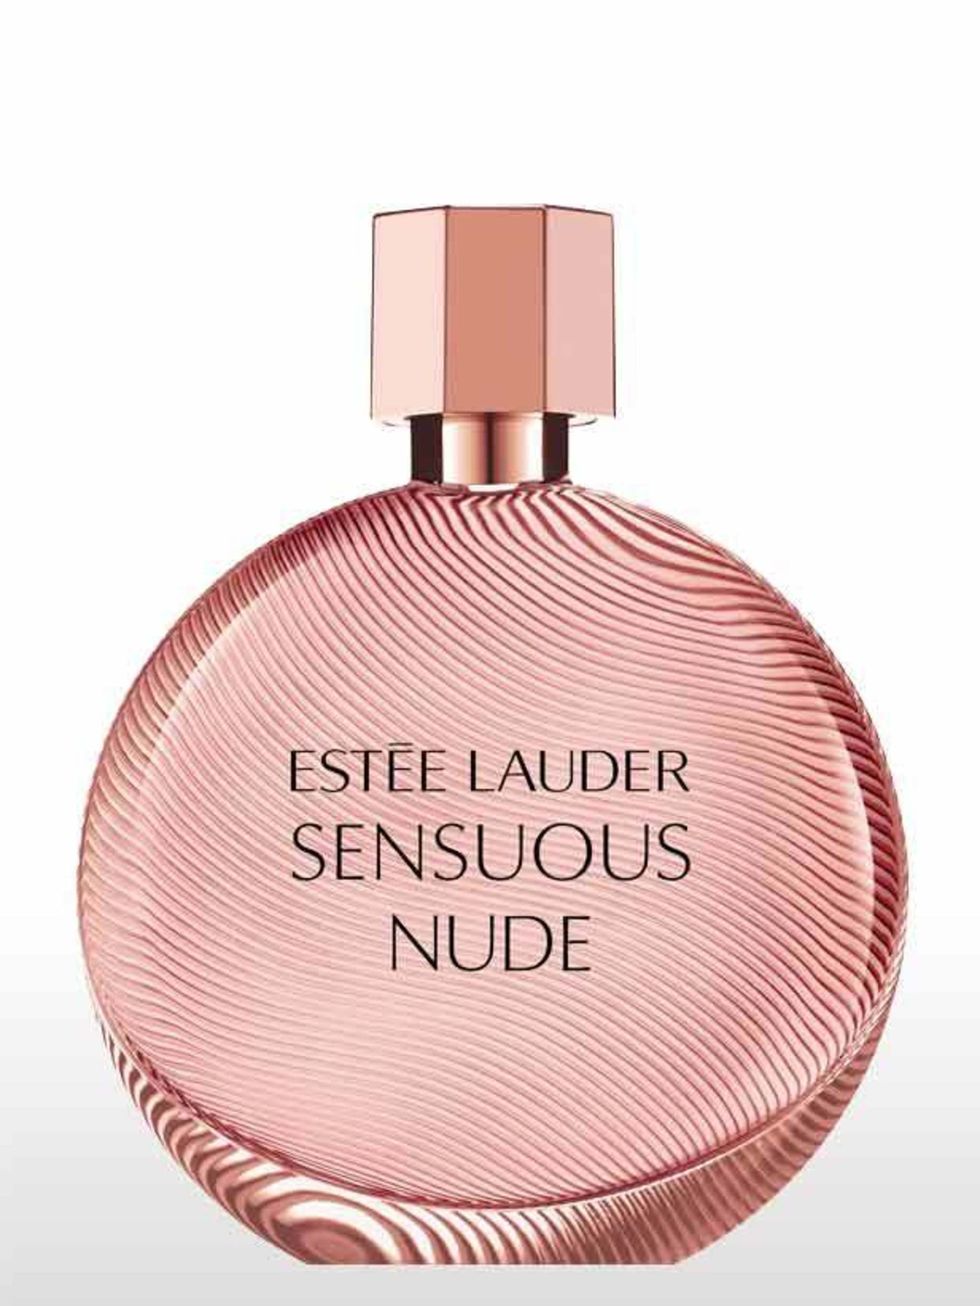 <p>Estée Lauder Sensuous Nude [£47 for 50ml edp] features Sicilian bergamot, black pepper, jasmine, honey and vanilla to mimic the warmth of bare skin - perfect for a romantic getaway. </p><p>Available at Estée Lauder counters nationwide and <a href="http